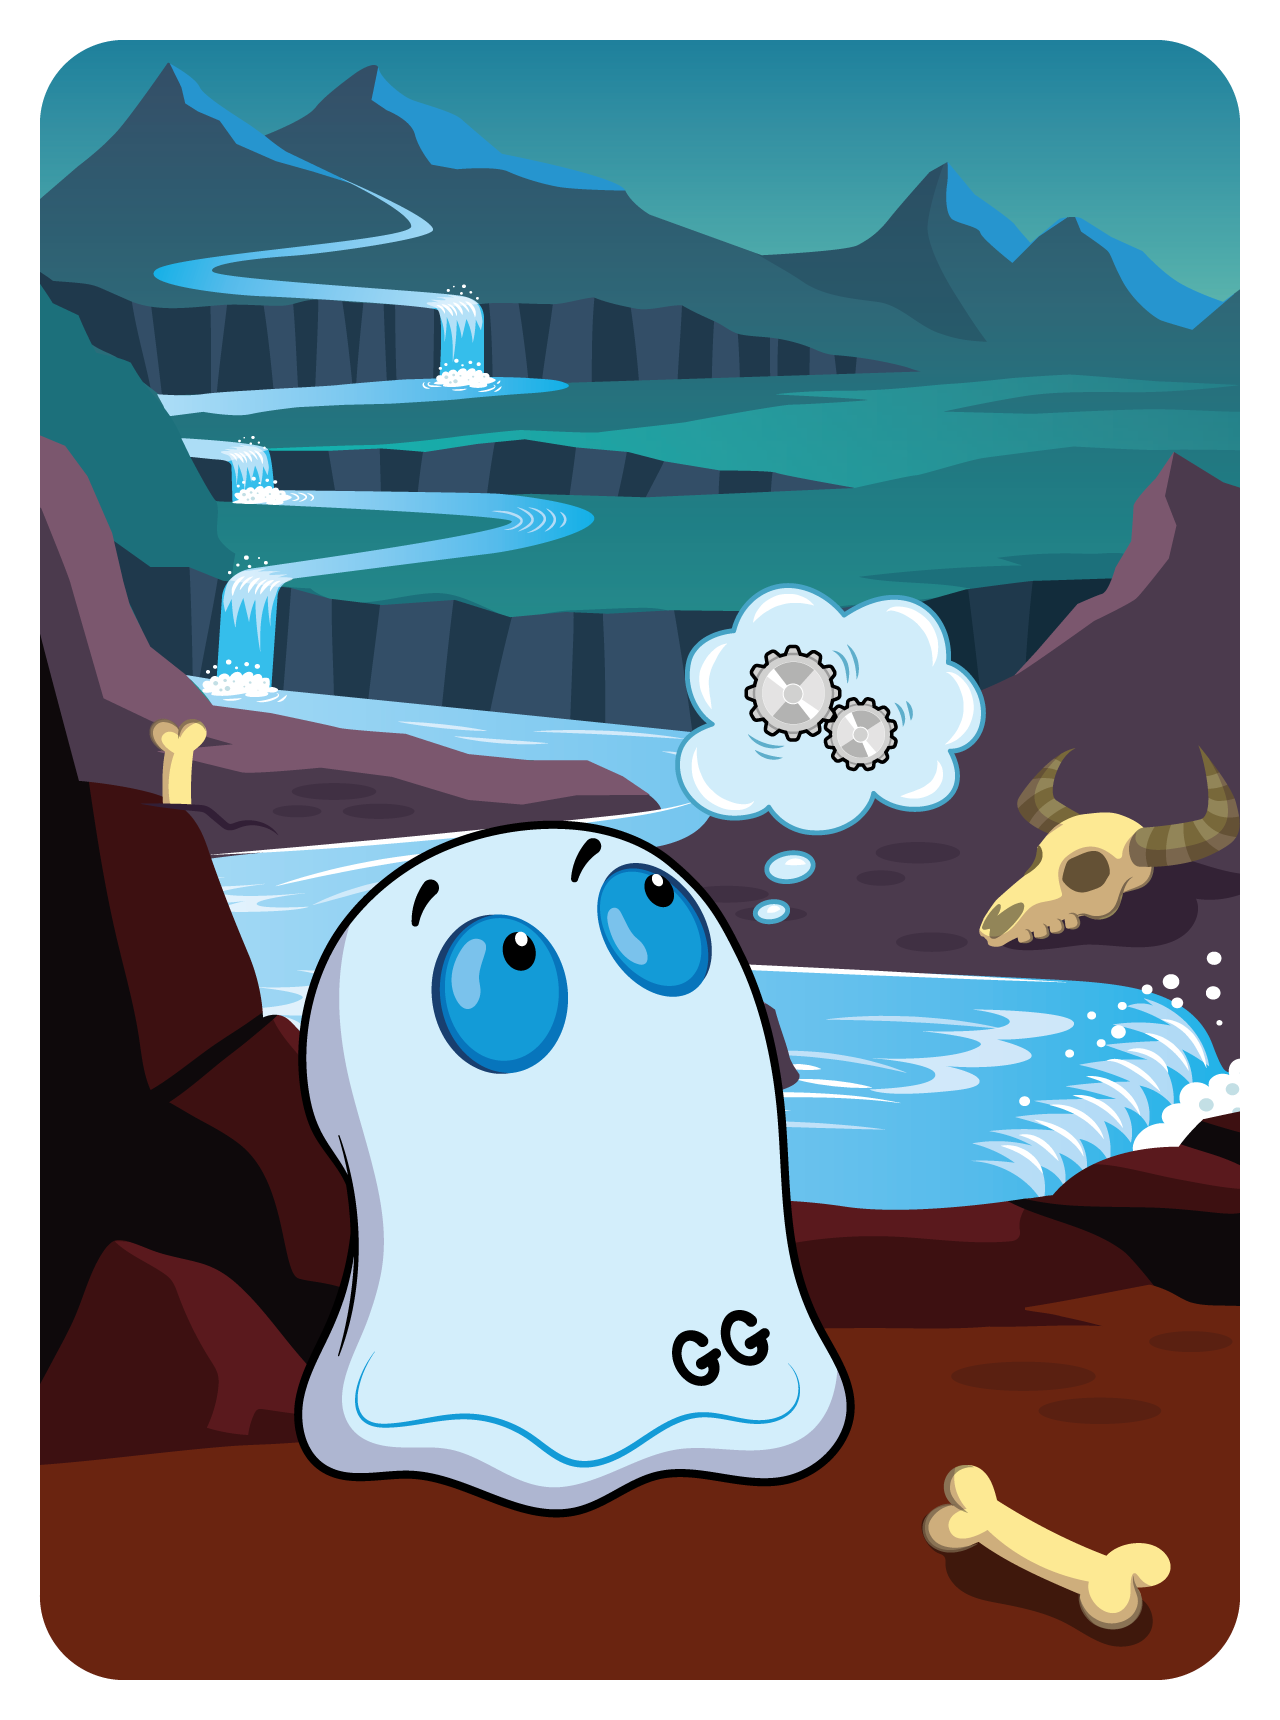 Gritty Ghost #53080